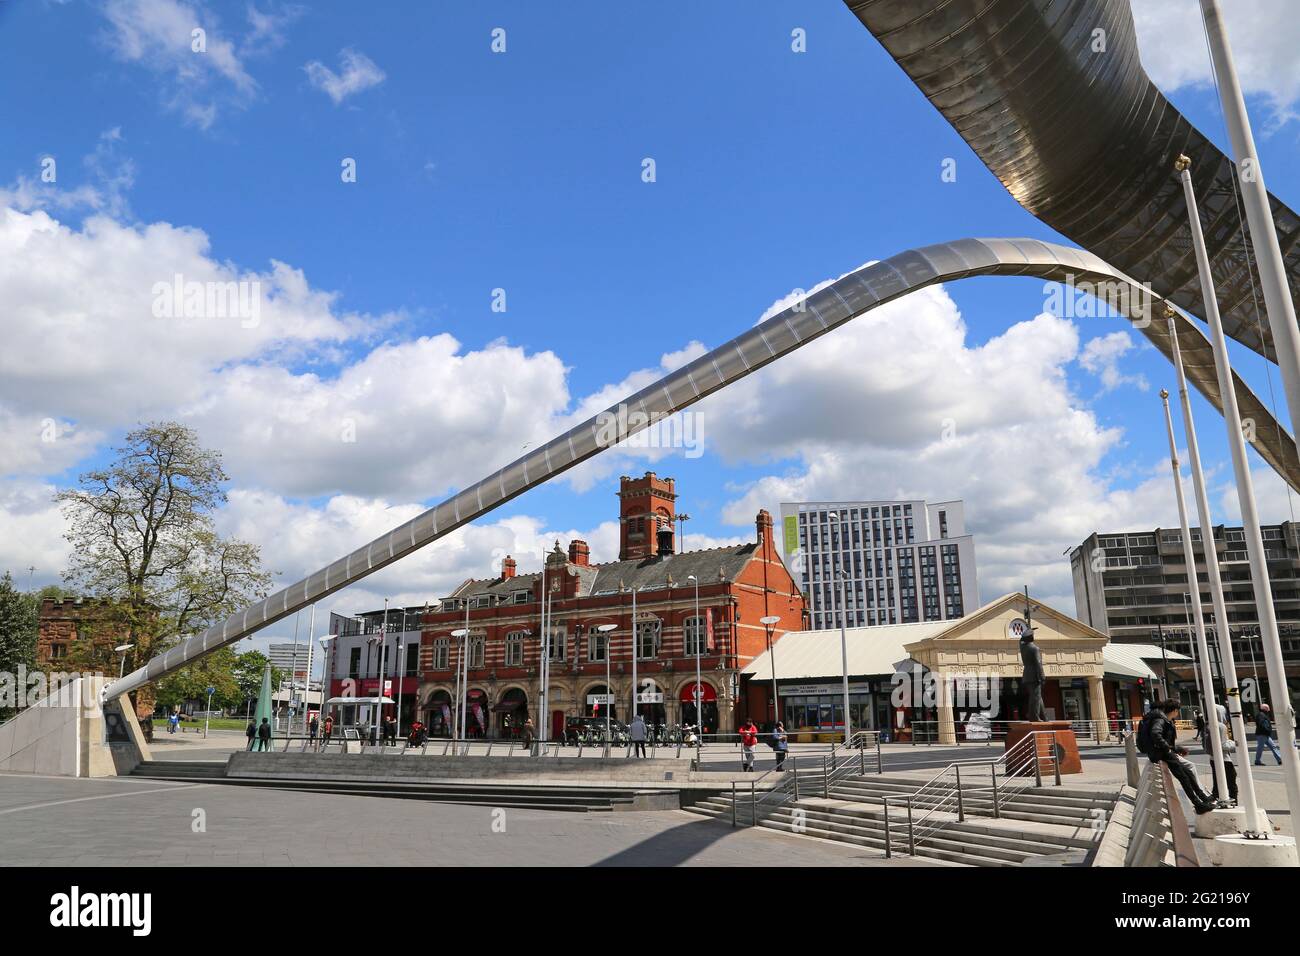 Whittle Arch, Millennium Place, Hales Street, City centre, Coventry, West Midlands, England, Great Britain, UK, Europe Stock Photo